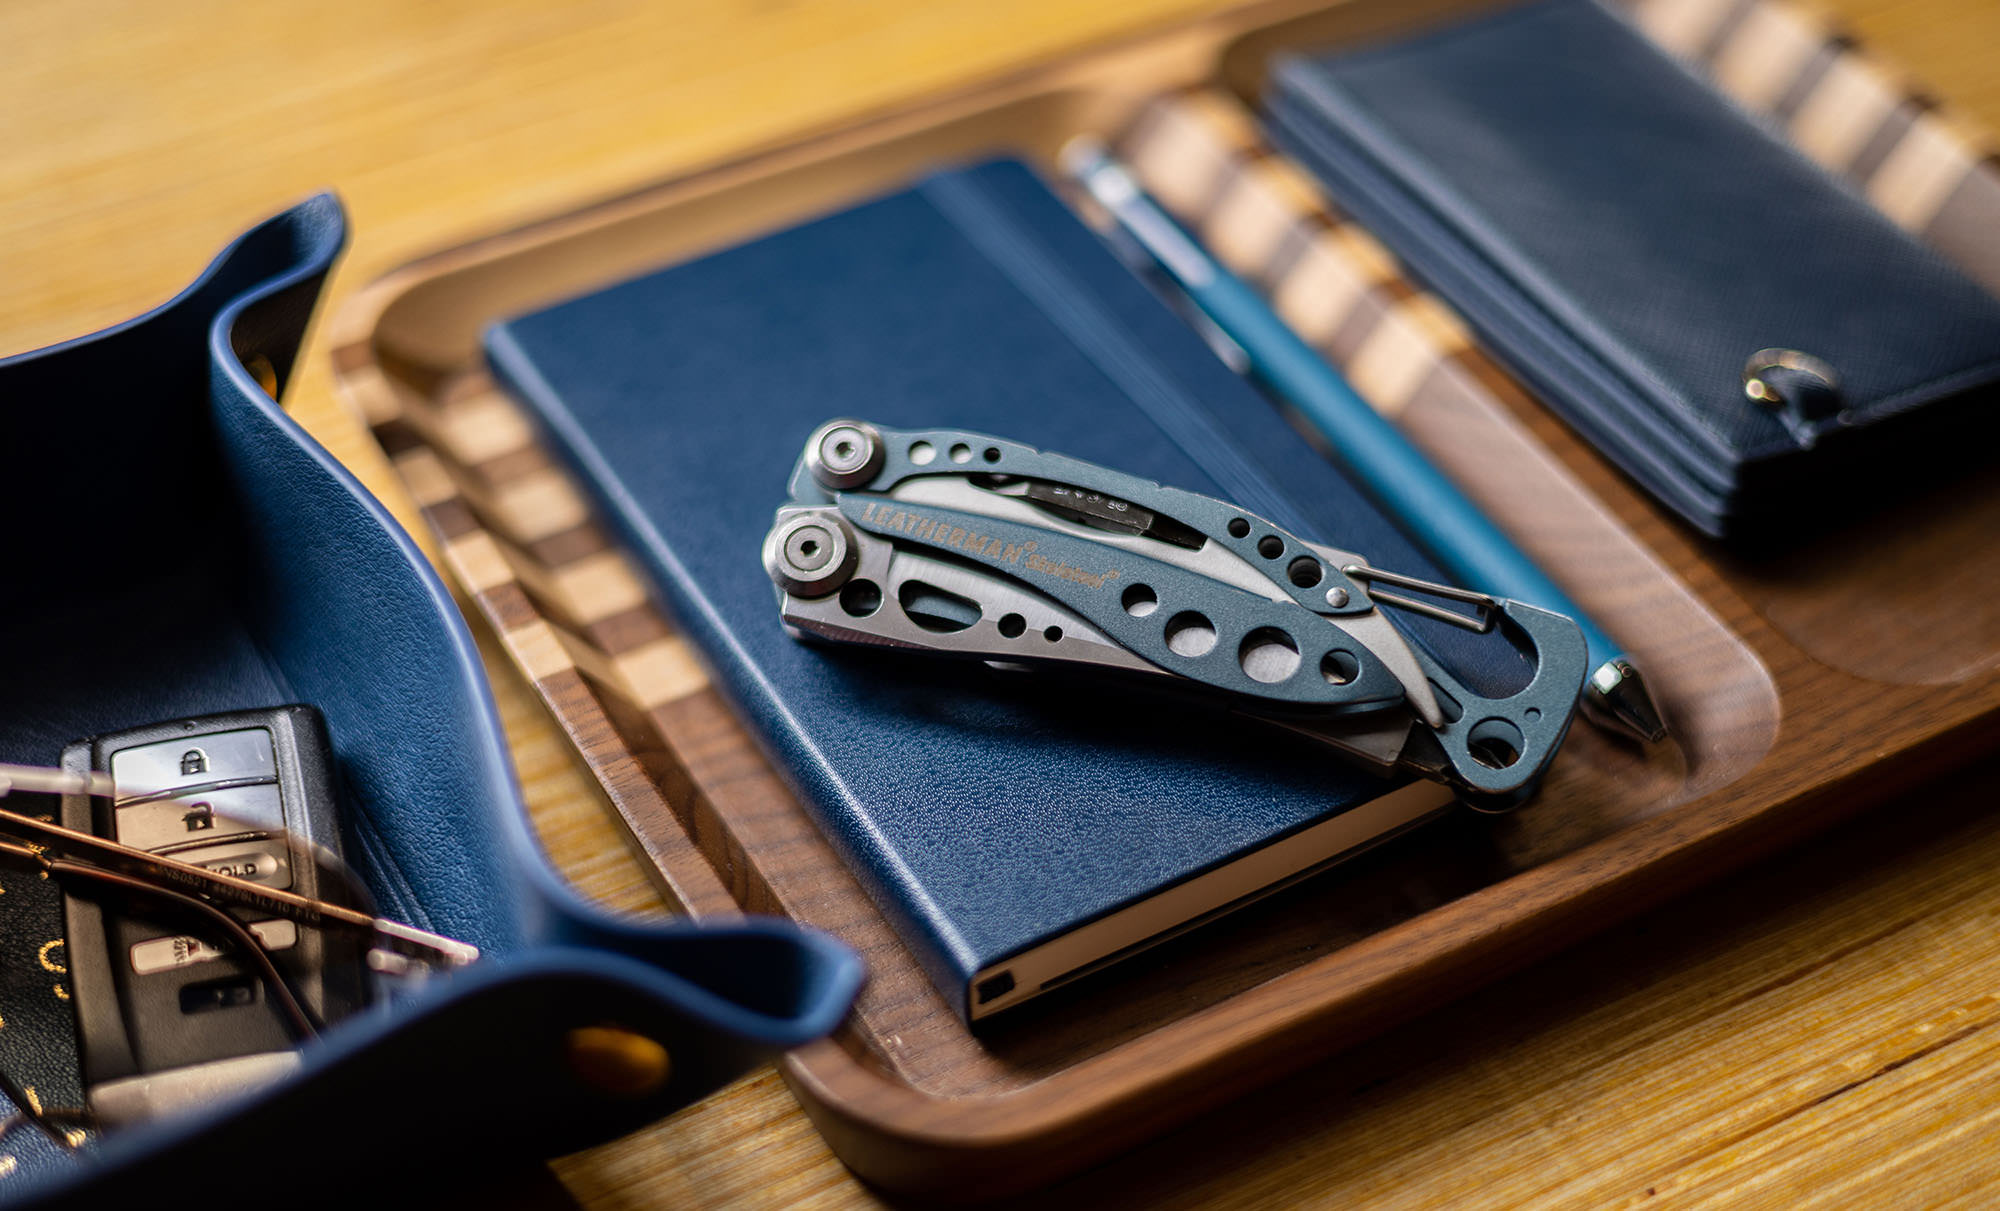 skeletool on a desk next to a wallet and keys